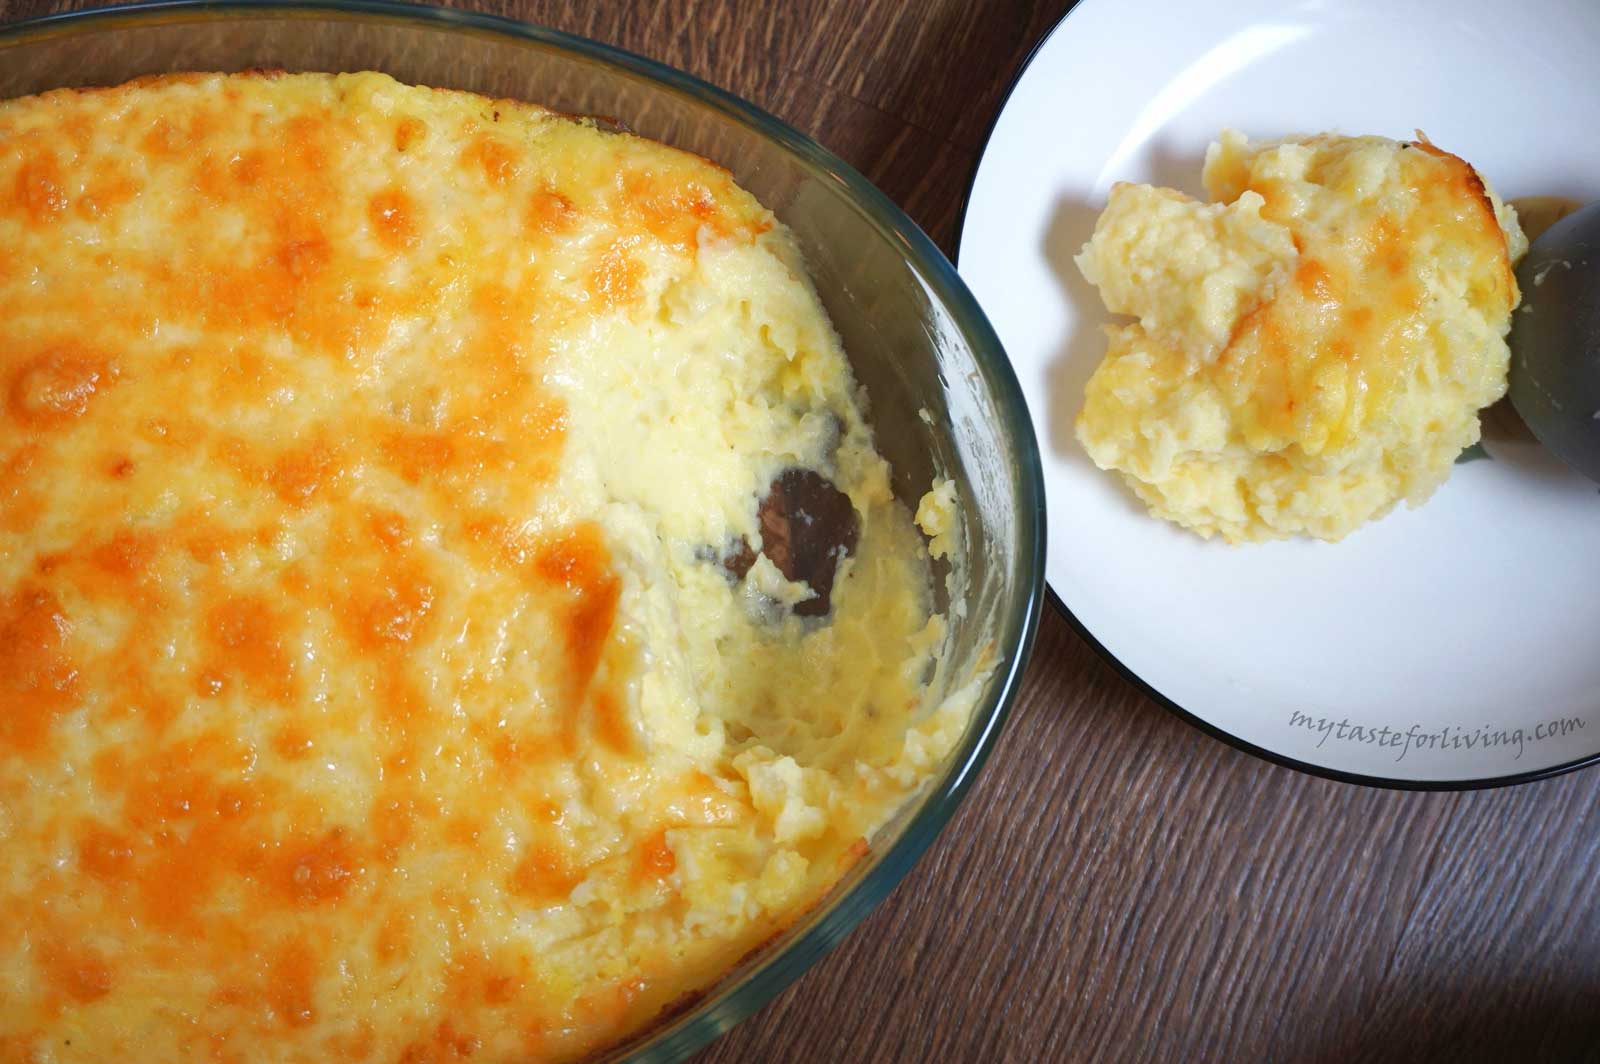 Delicious casserole made from mashed potatoes with sour cream, cheddar (or yellow cheese), stewed in butter onion and garlic, baked in the oven.